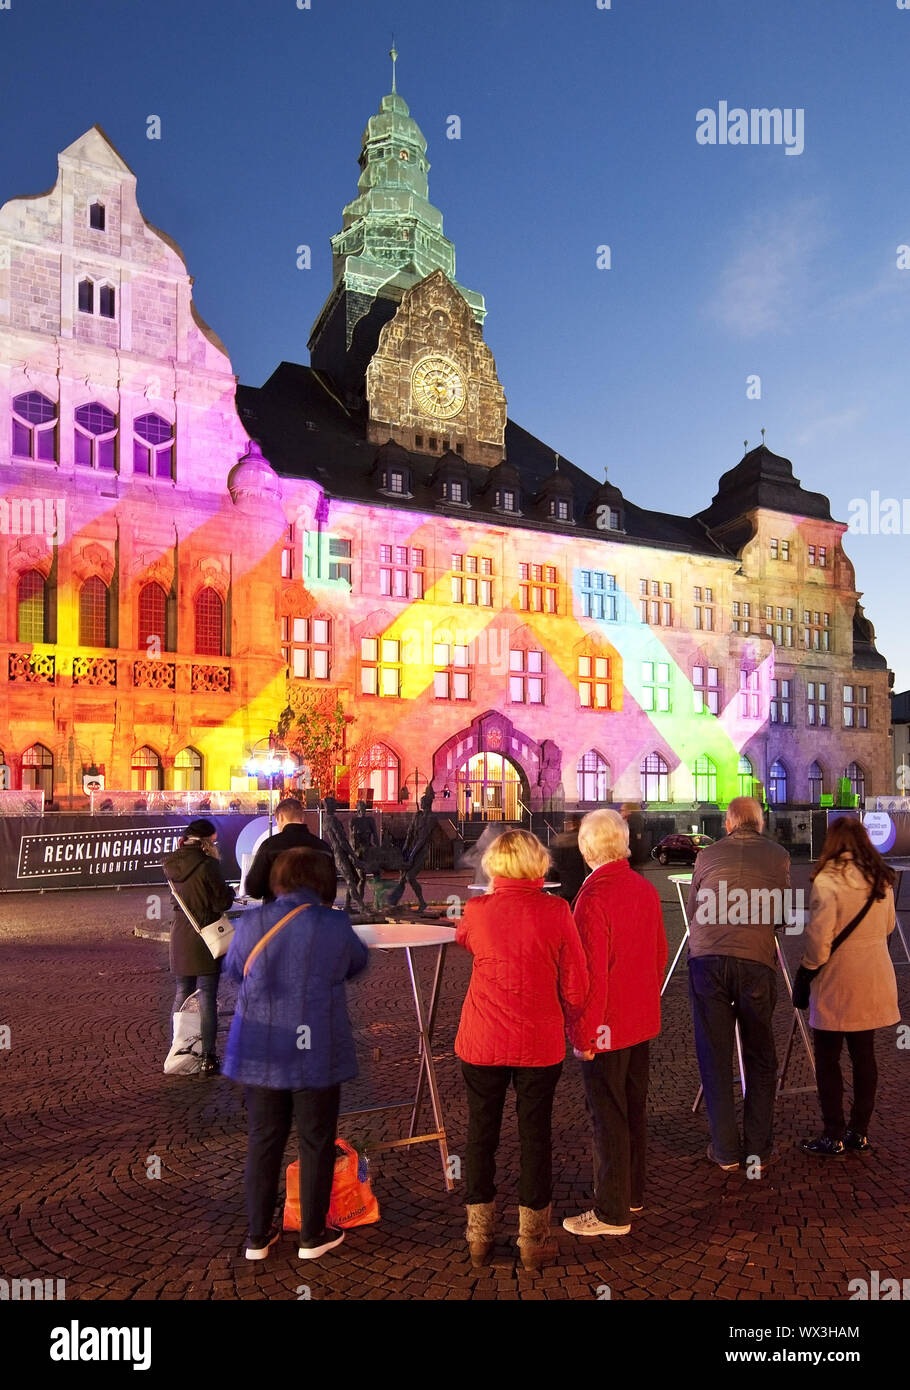 illuminated town hall in the evening, Recklinghausen illuminations, Recklinghausen, Germany, Europe Stock Photo